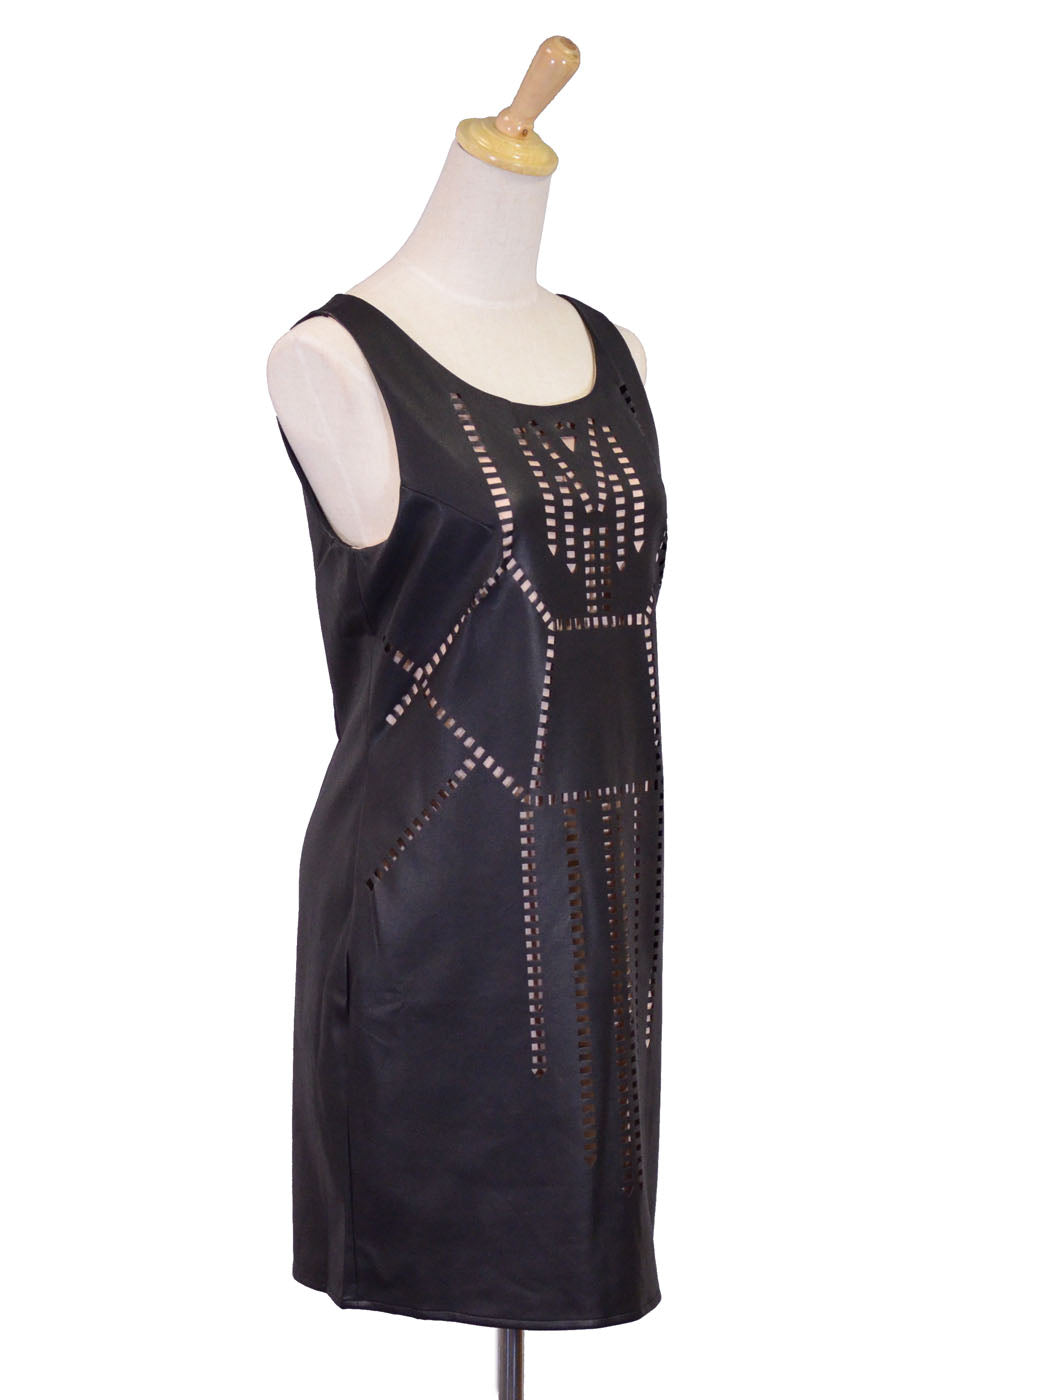 Gentle Fawn Faux Leather Sleeveless Dress With Laser Cutout Design Pink Lining - ALILANG.COM